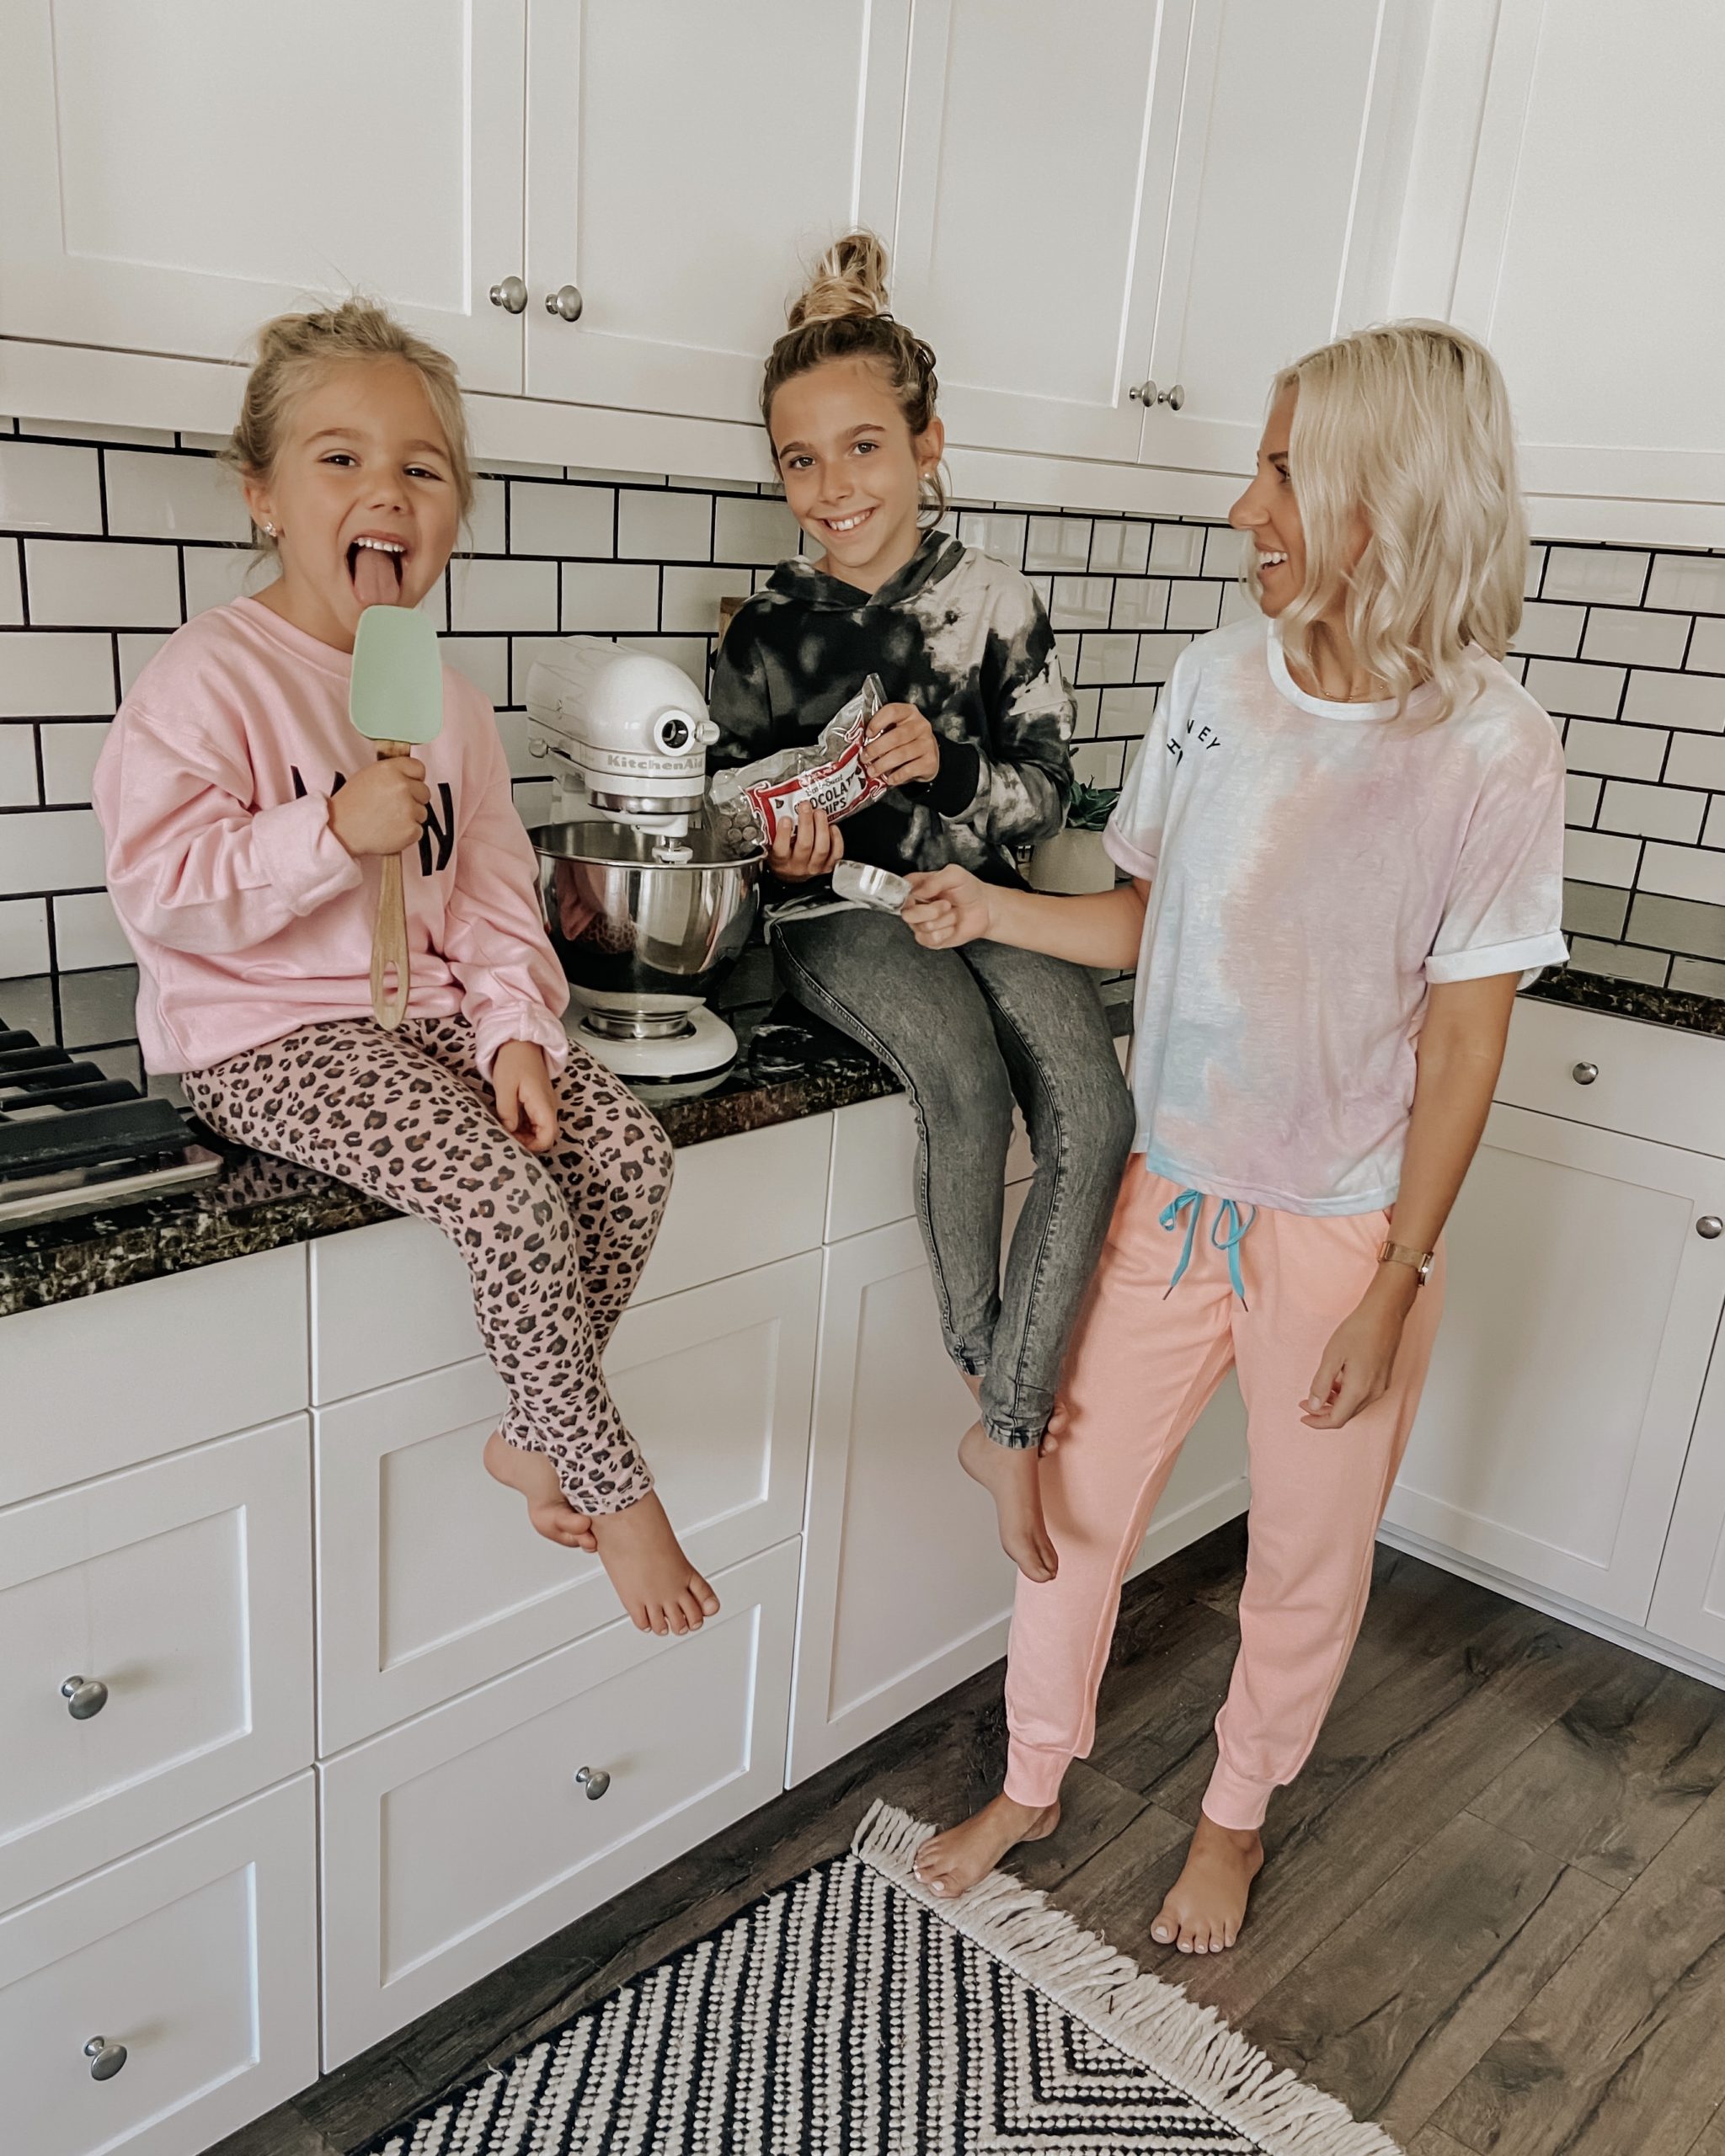 BAKING BANANA BREAD WITH MY GIRLS- Jaclyn De Leon Style: Having fun with my kids in the kitchen and sharing Lulu's famous chocolate chip banana bread recipe